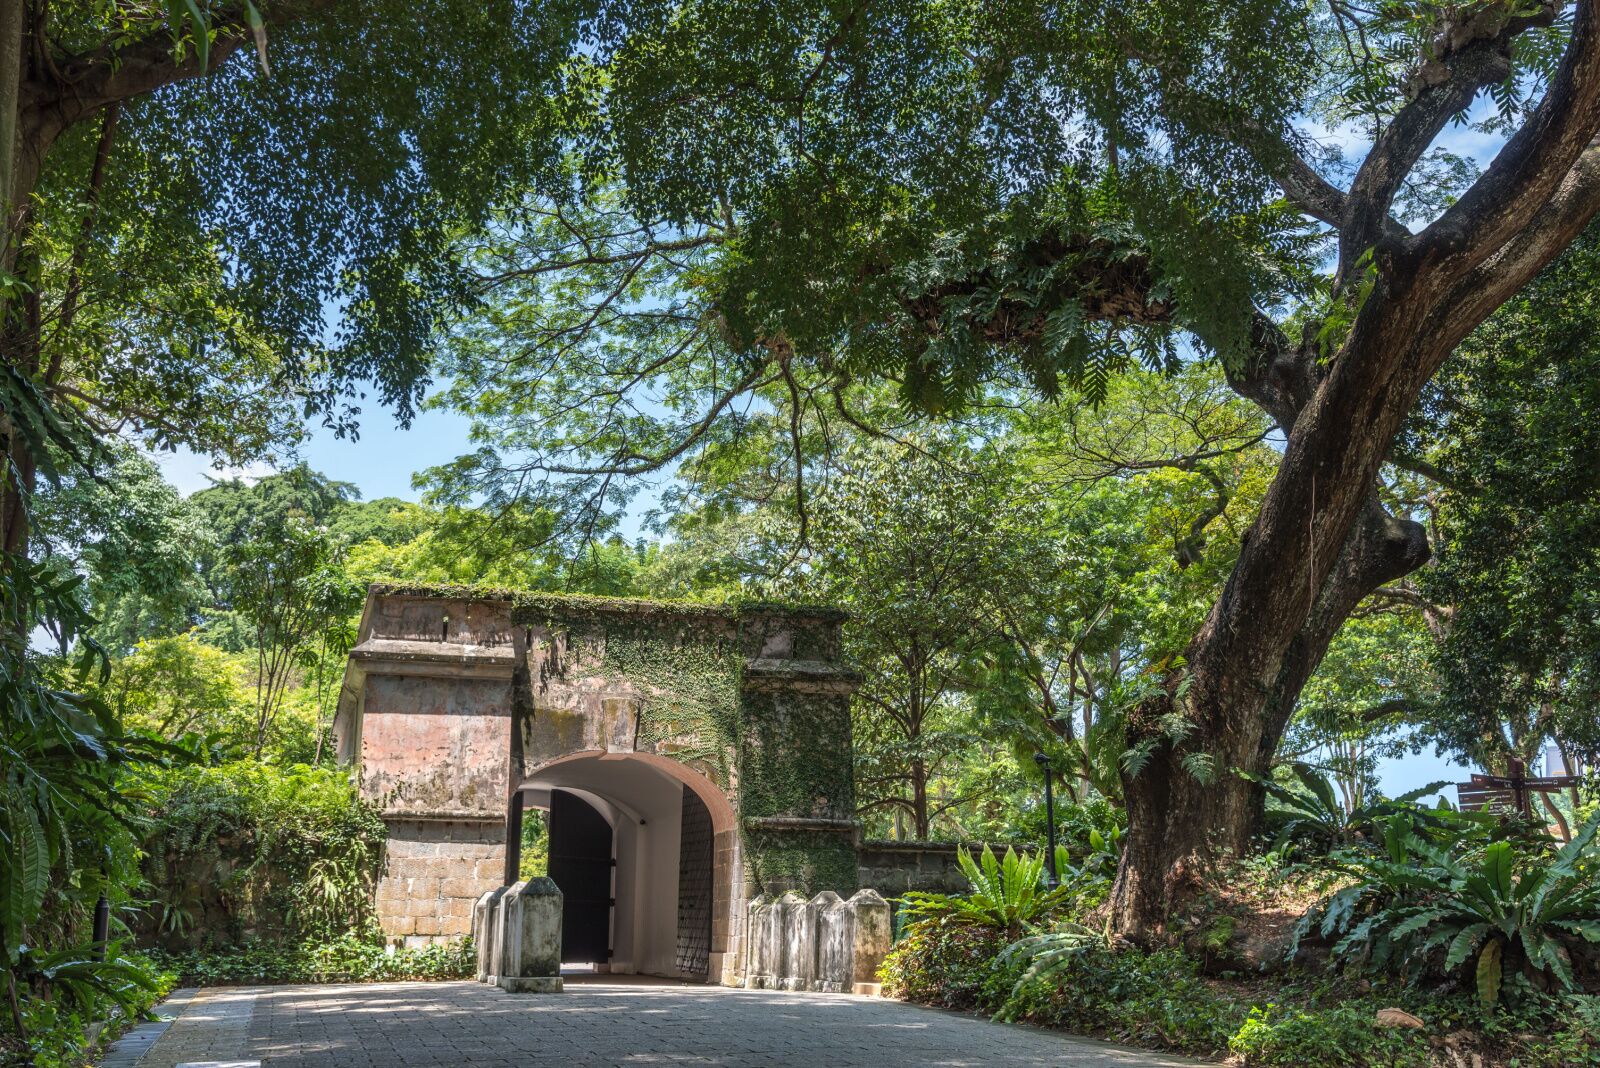 Fort canning park gate - parks in singapore